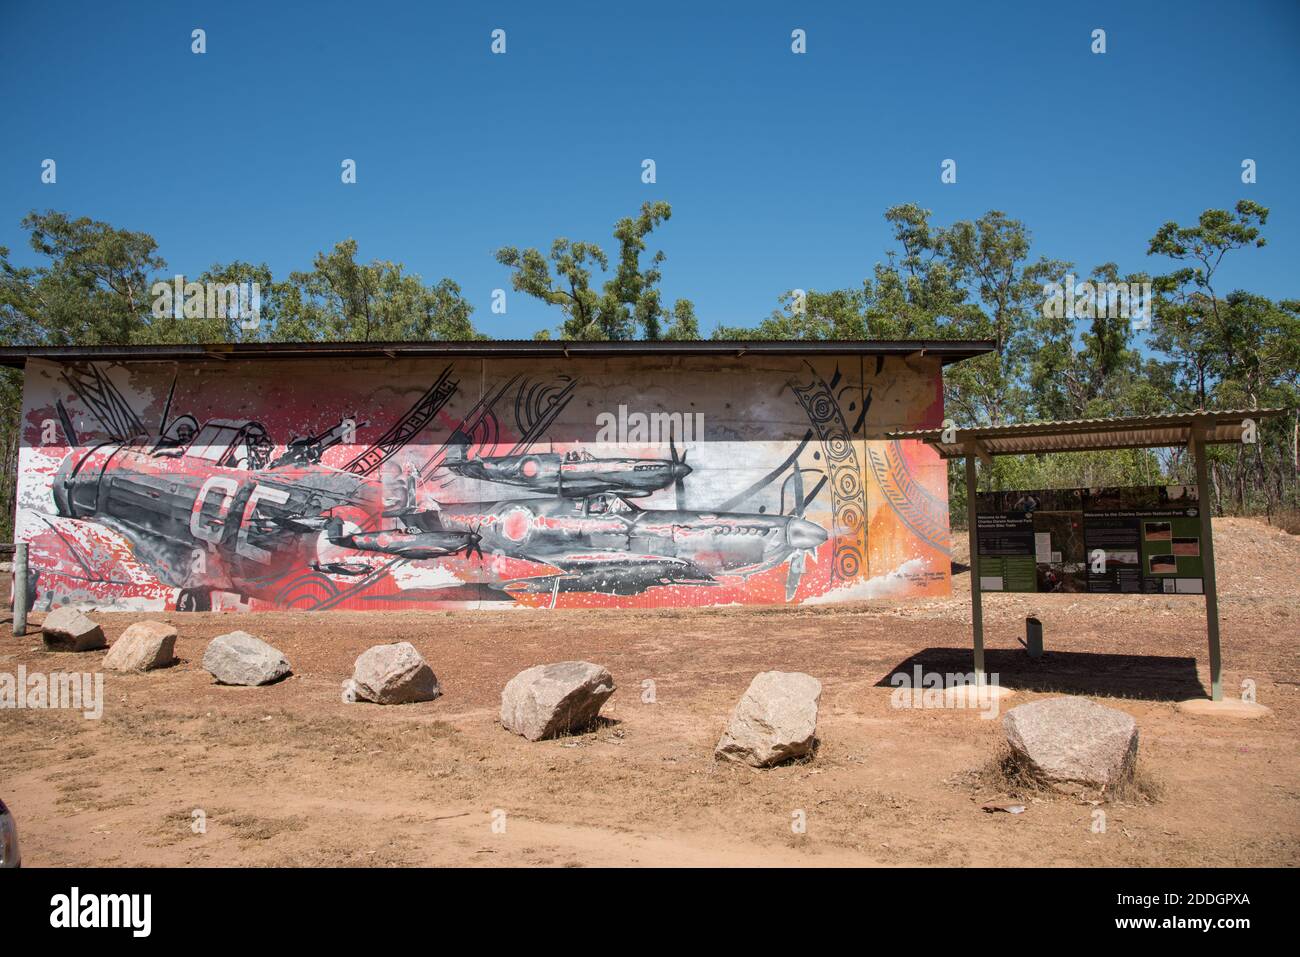 Darwin, NT, Australia-August 15,2018: Building with mural and informational sign at Charles Darwin National Park in the NT of Australia Stock Photo